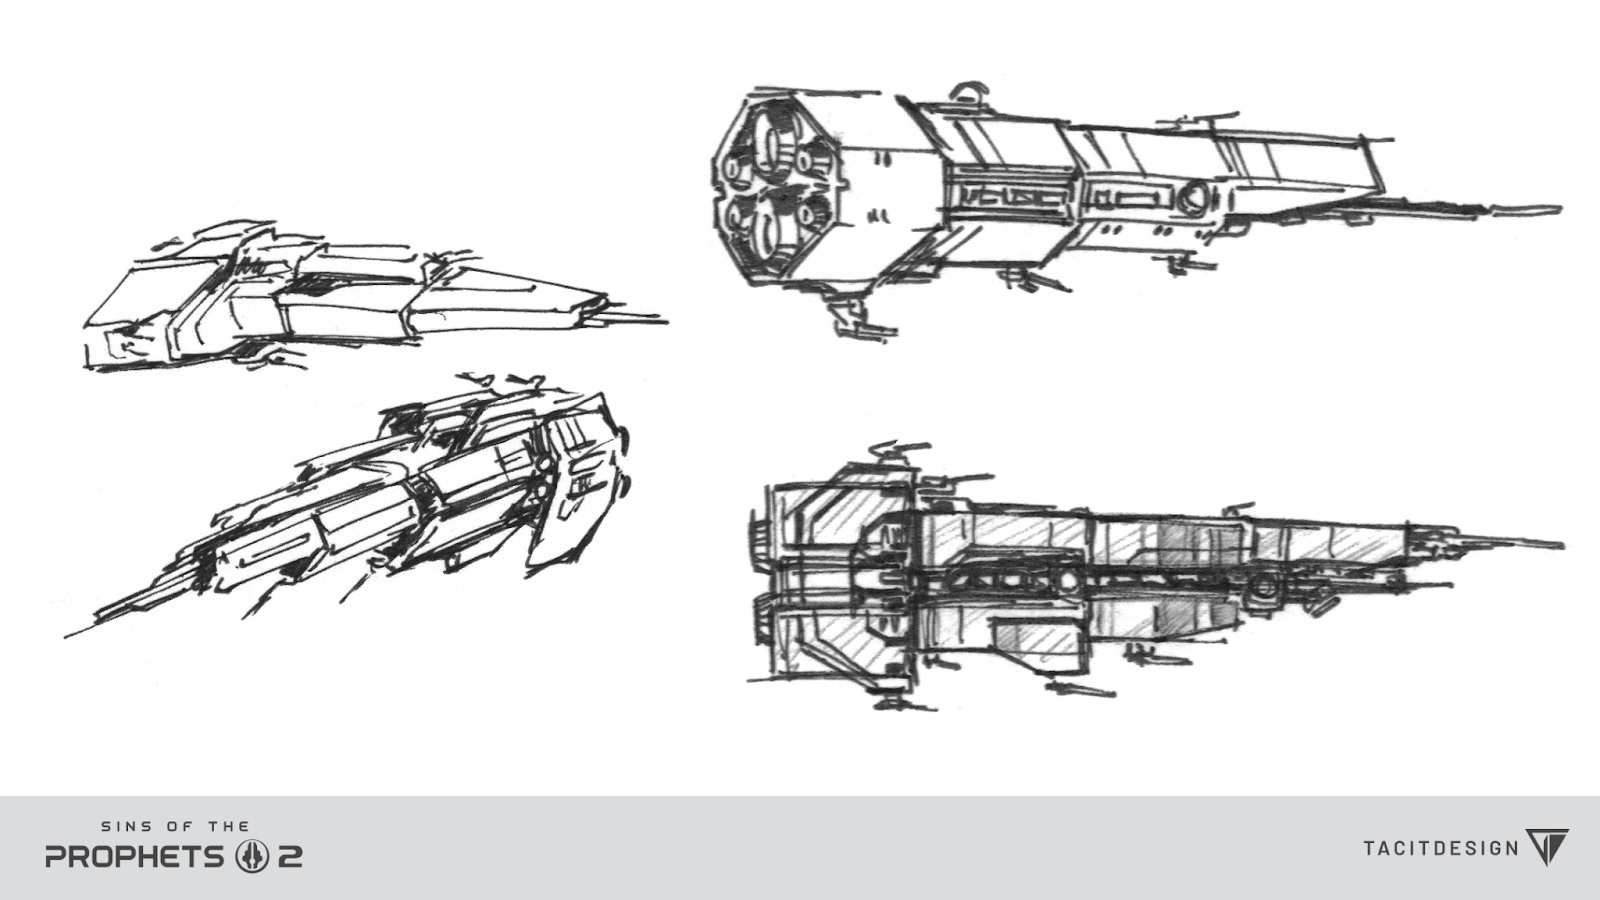 Sins of the Prophets concept art of the Able-class heavy destroyer